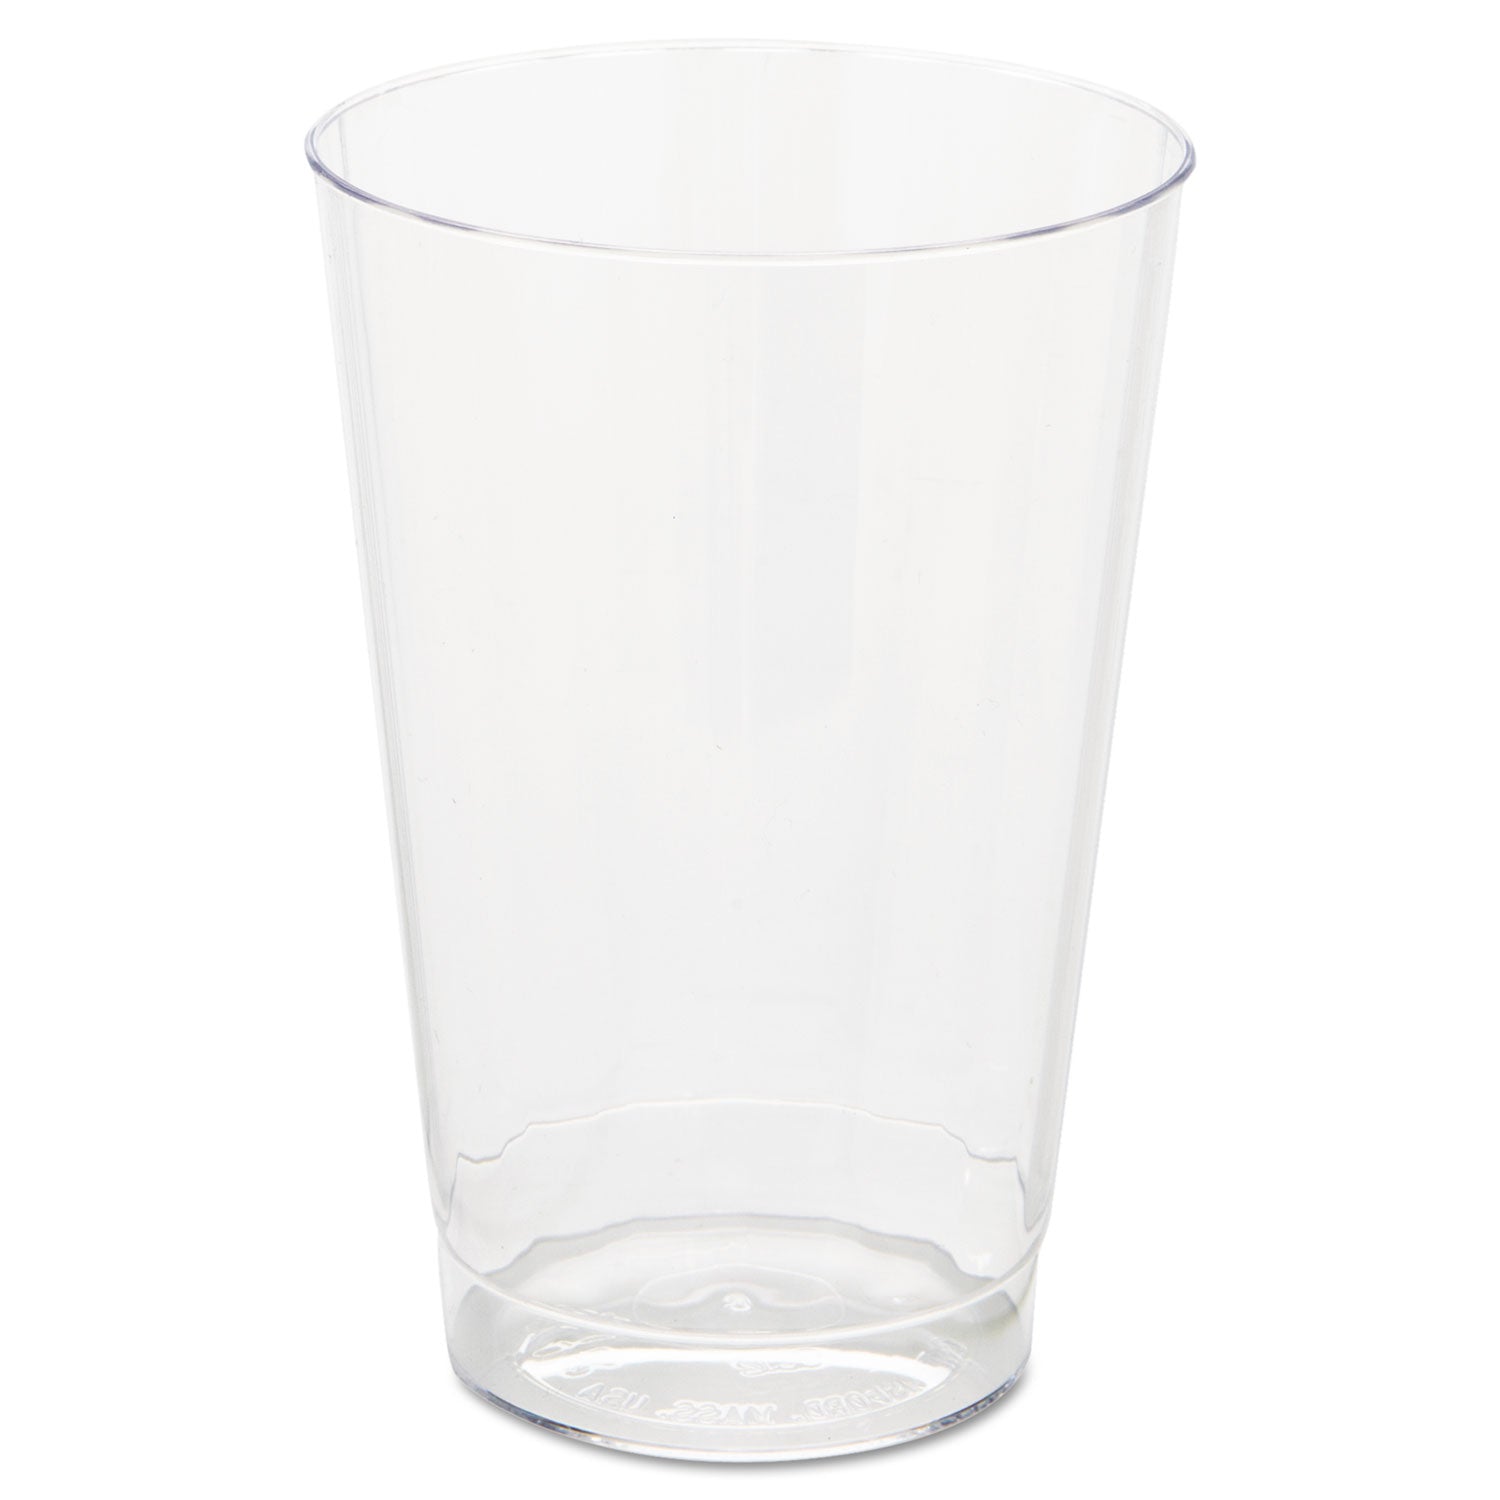 classic-crystal-plastic-tumblers-12-oz-clear-fluted-tall-20-pack-12-packs-carton_wnacc12240 - 1